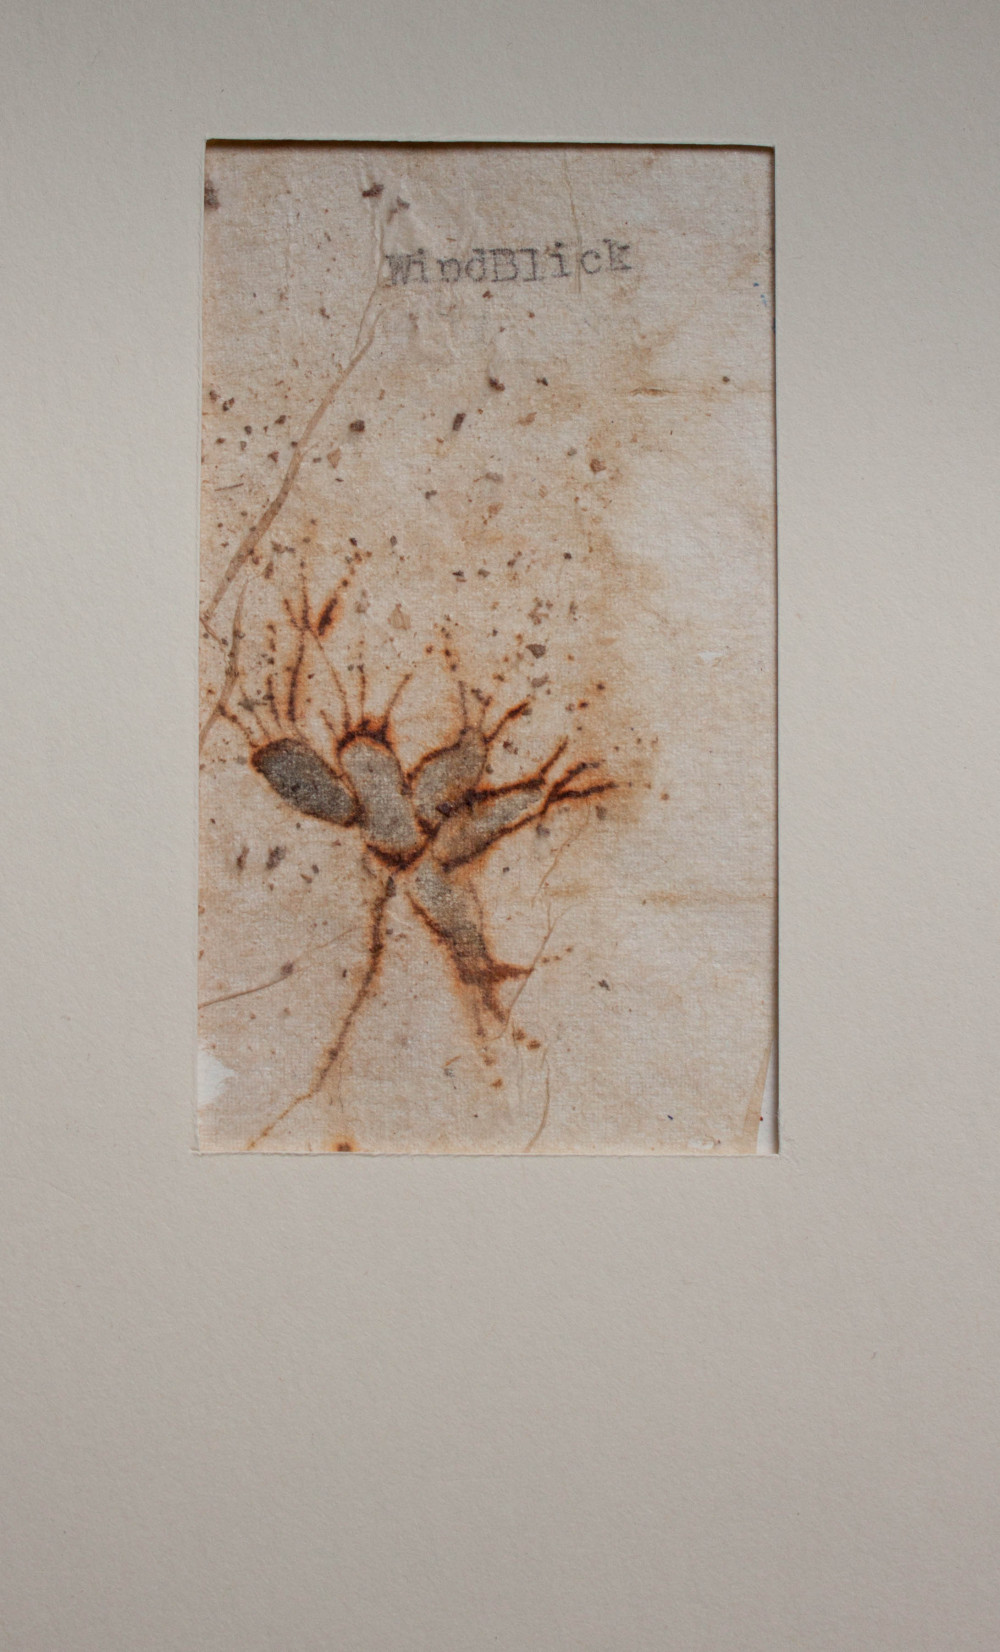 WindBlick | 2010 | watercolor and typewriter on used teabag